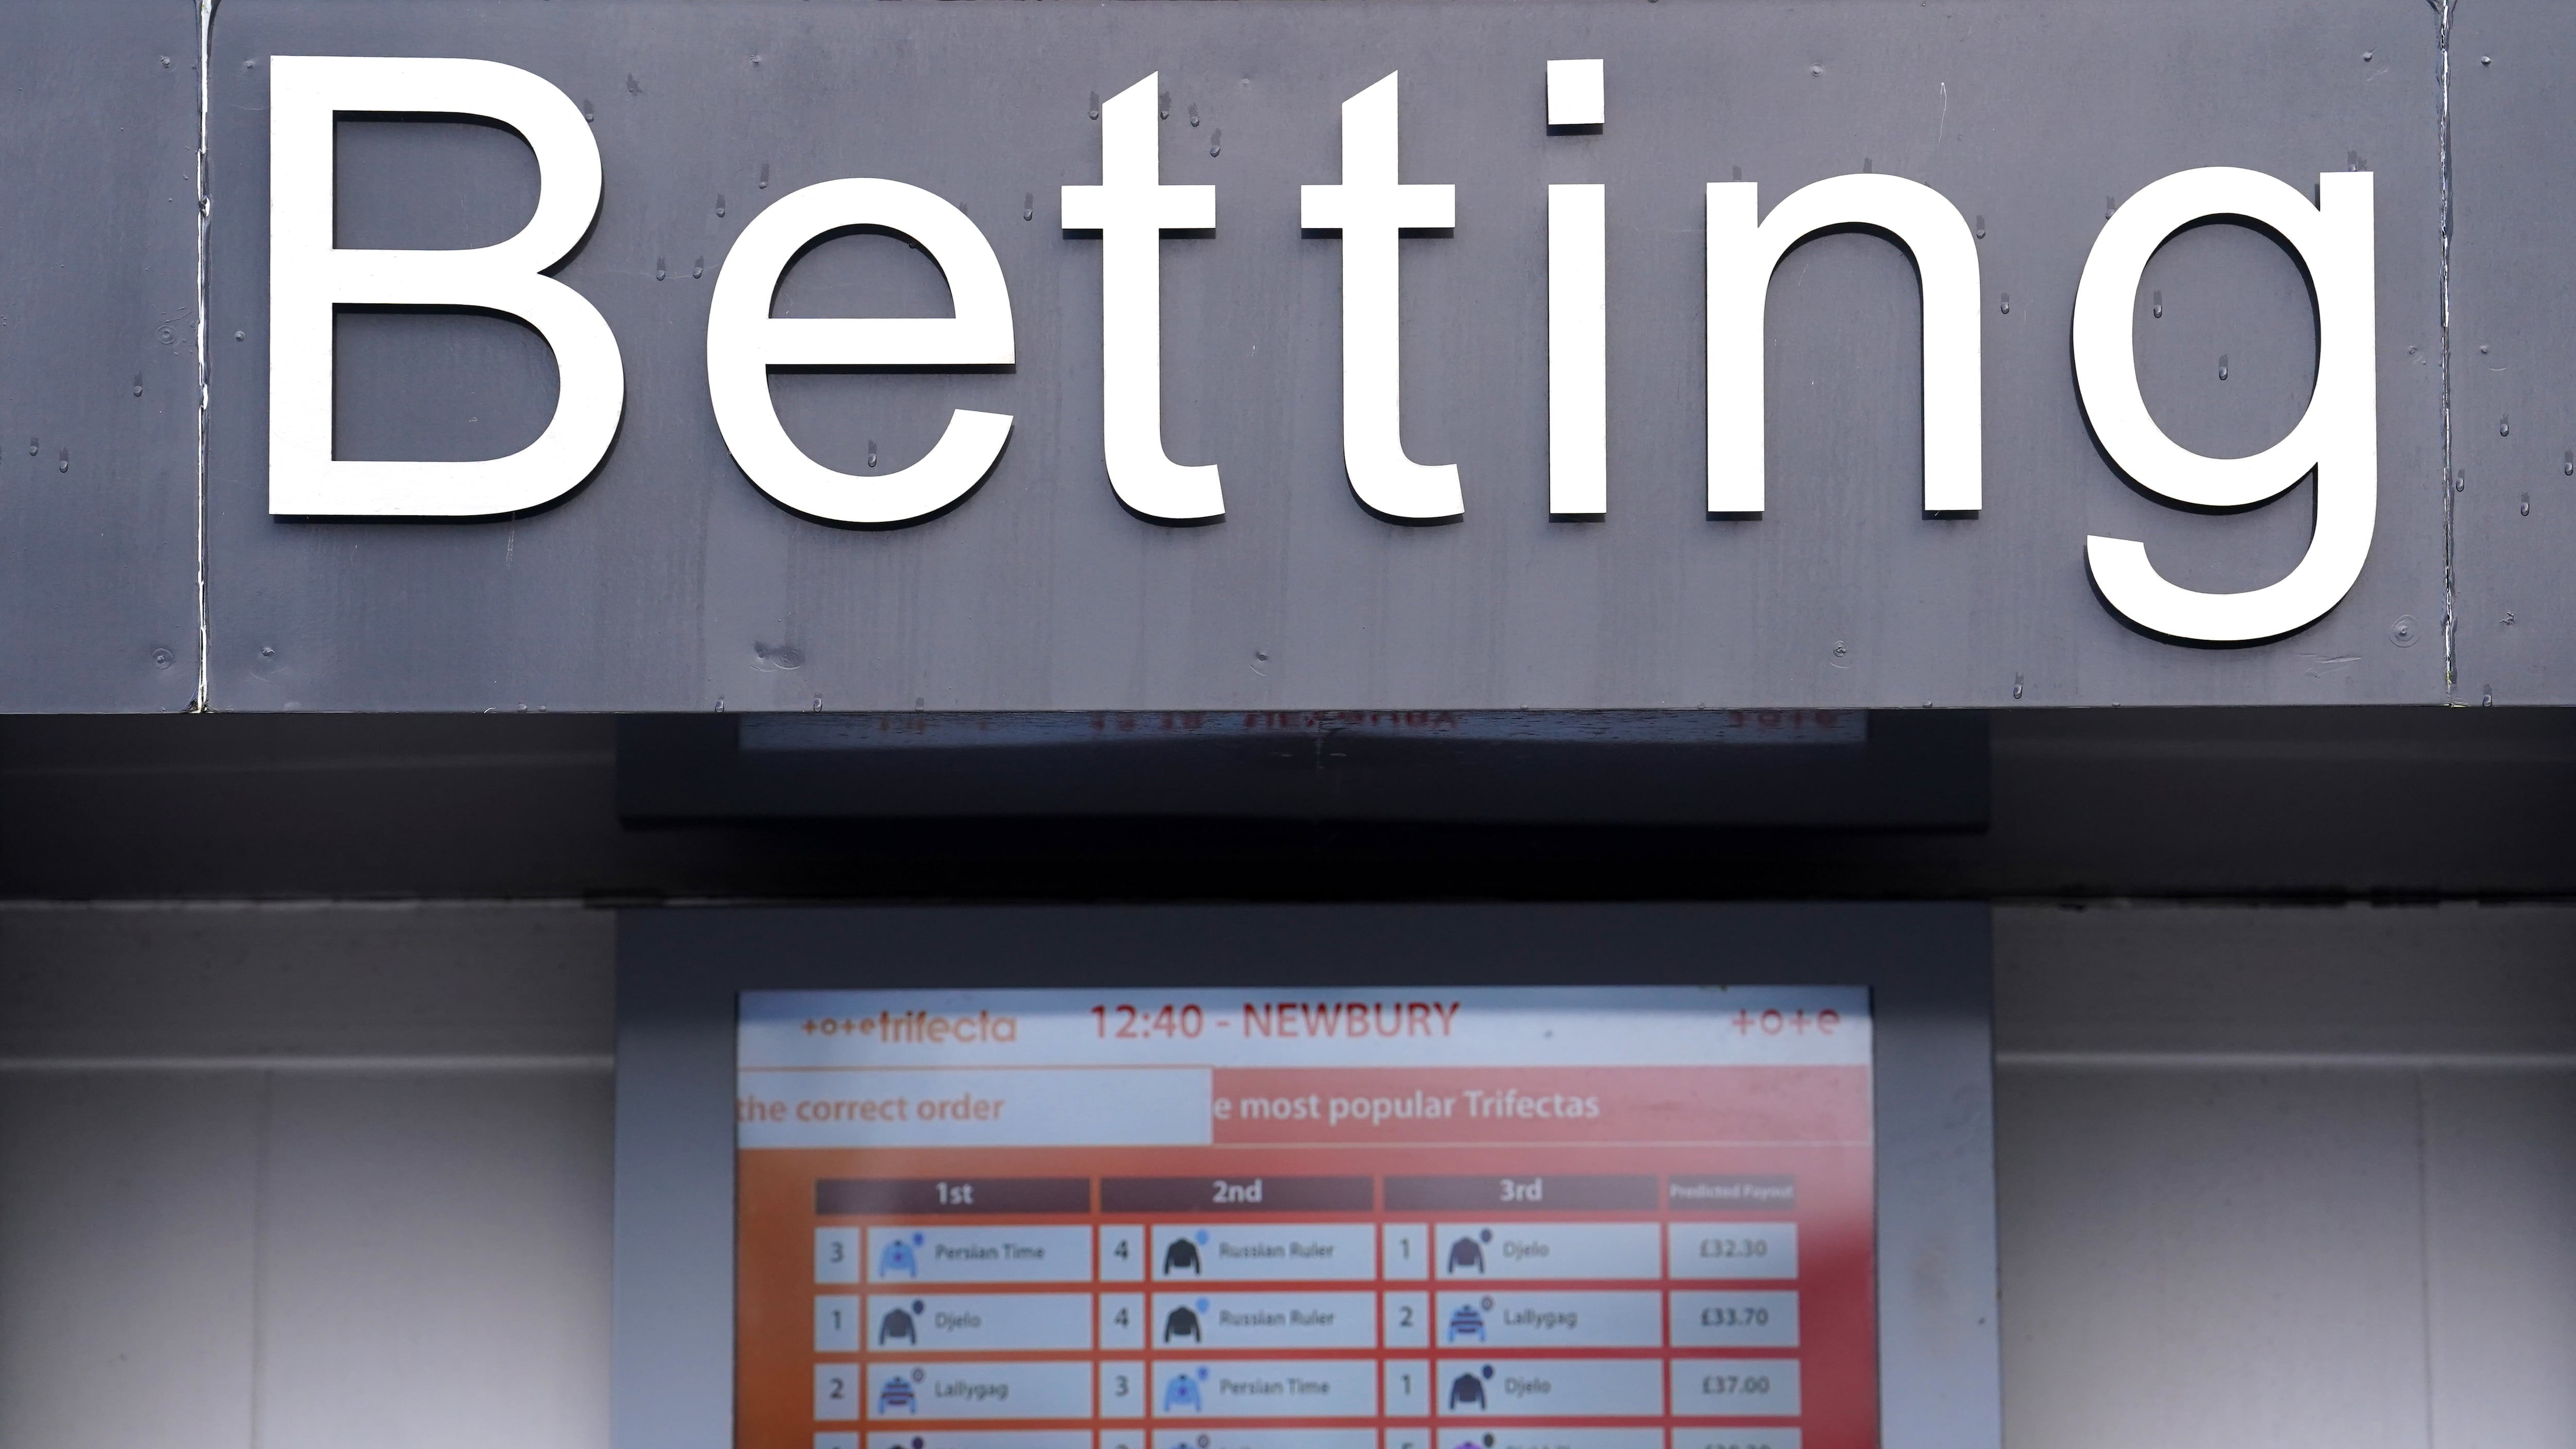 There are rules against betting with inside information